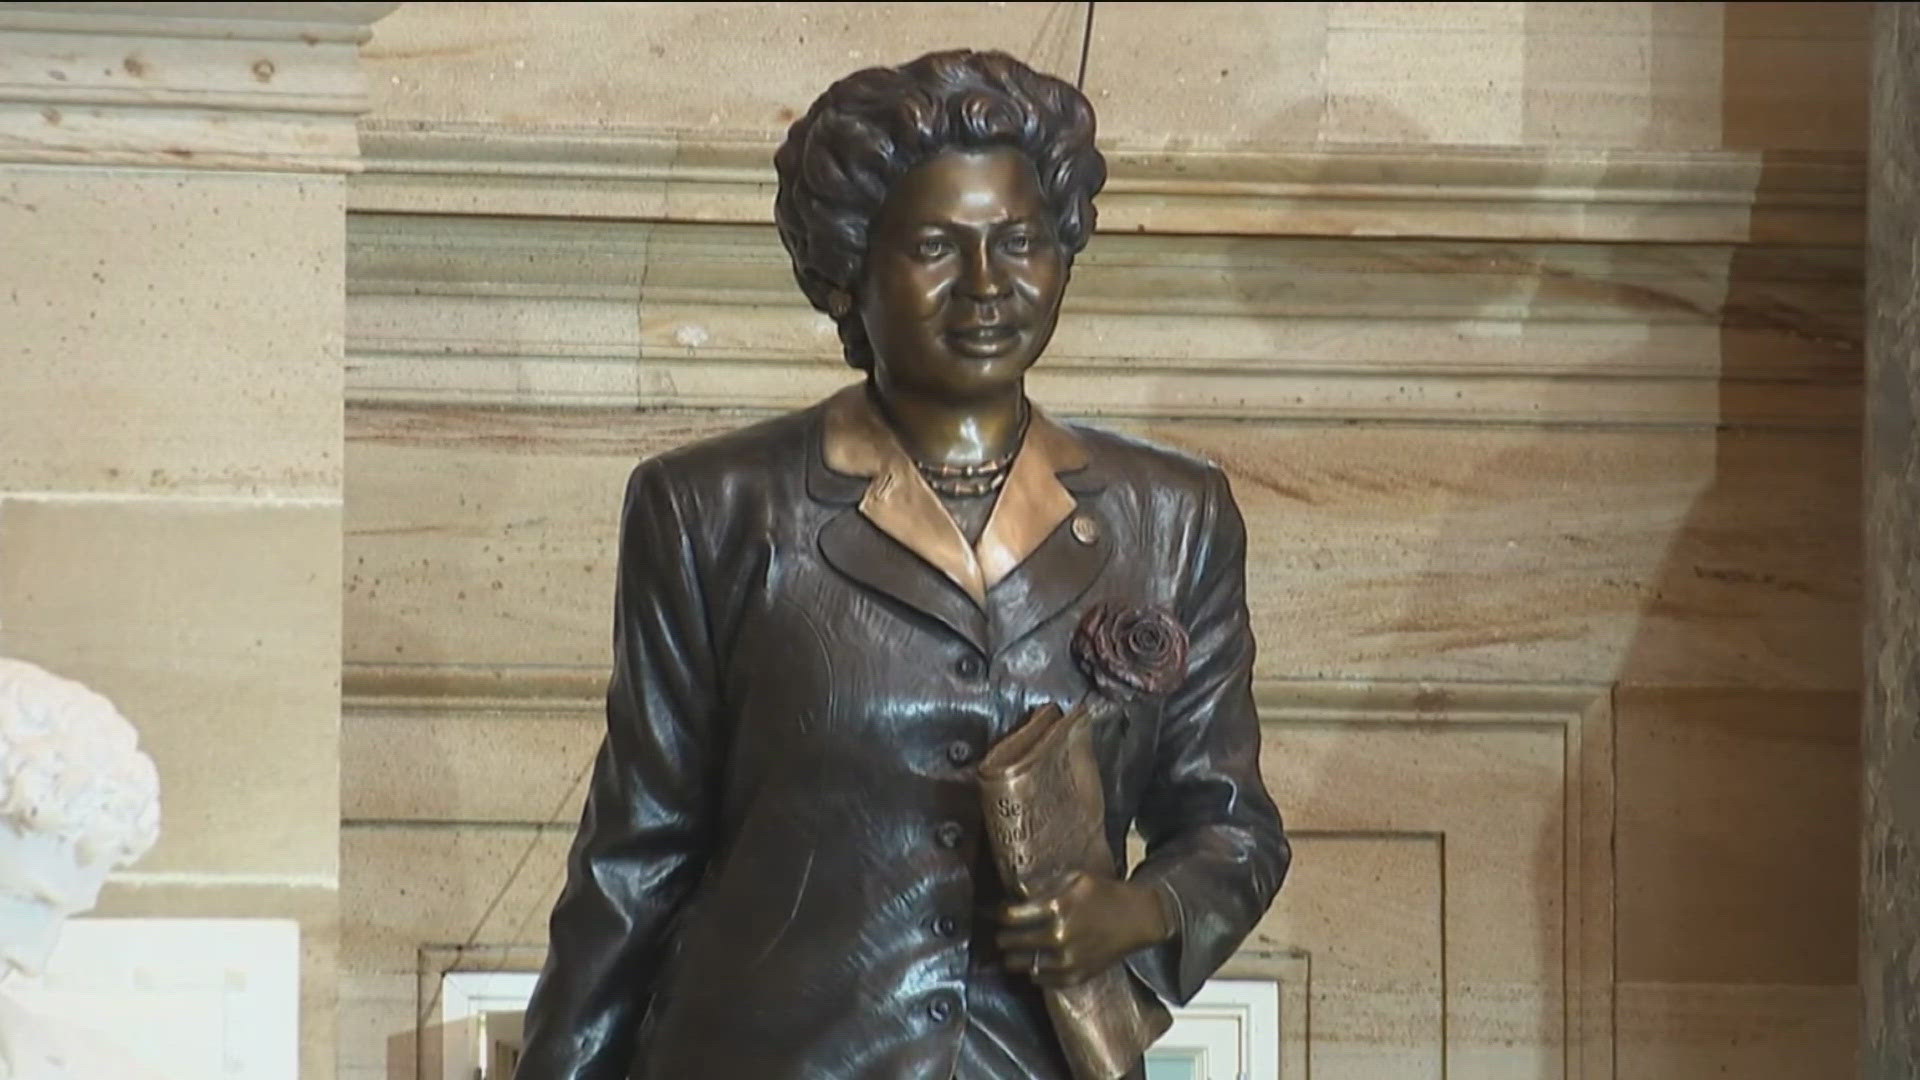 NEW AT 6 – A NEW STATUE HELPING REPRESENT ARKANSAS WAS UNVEILED TODAY AT THE U-S CAPITOL.